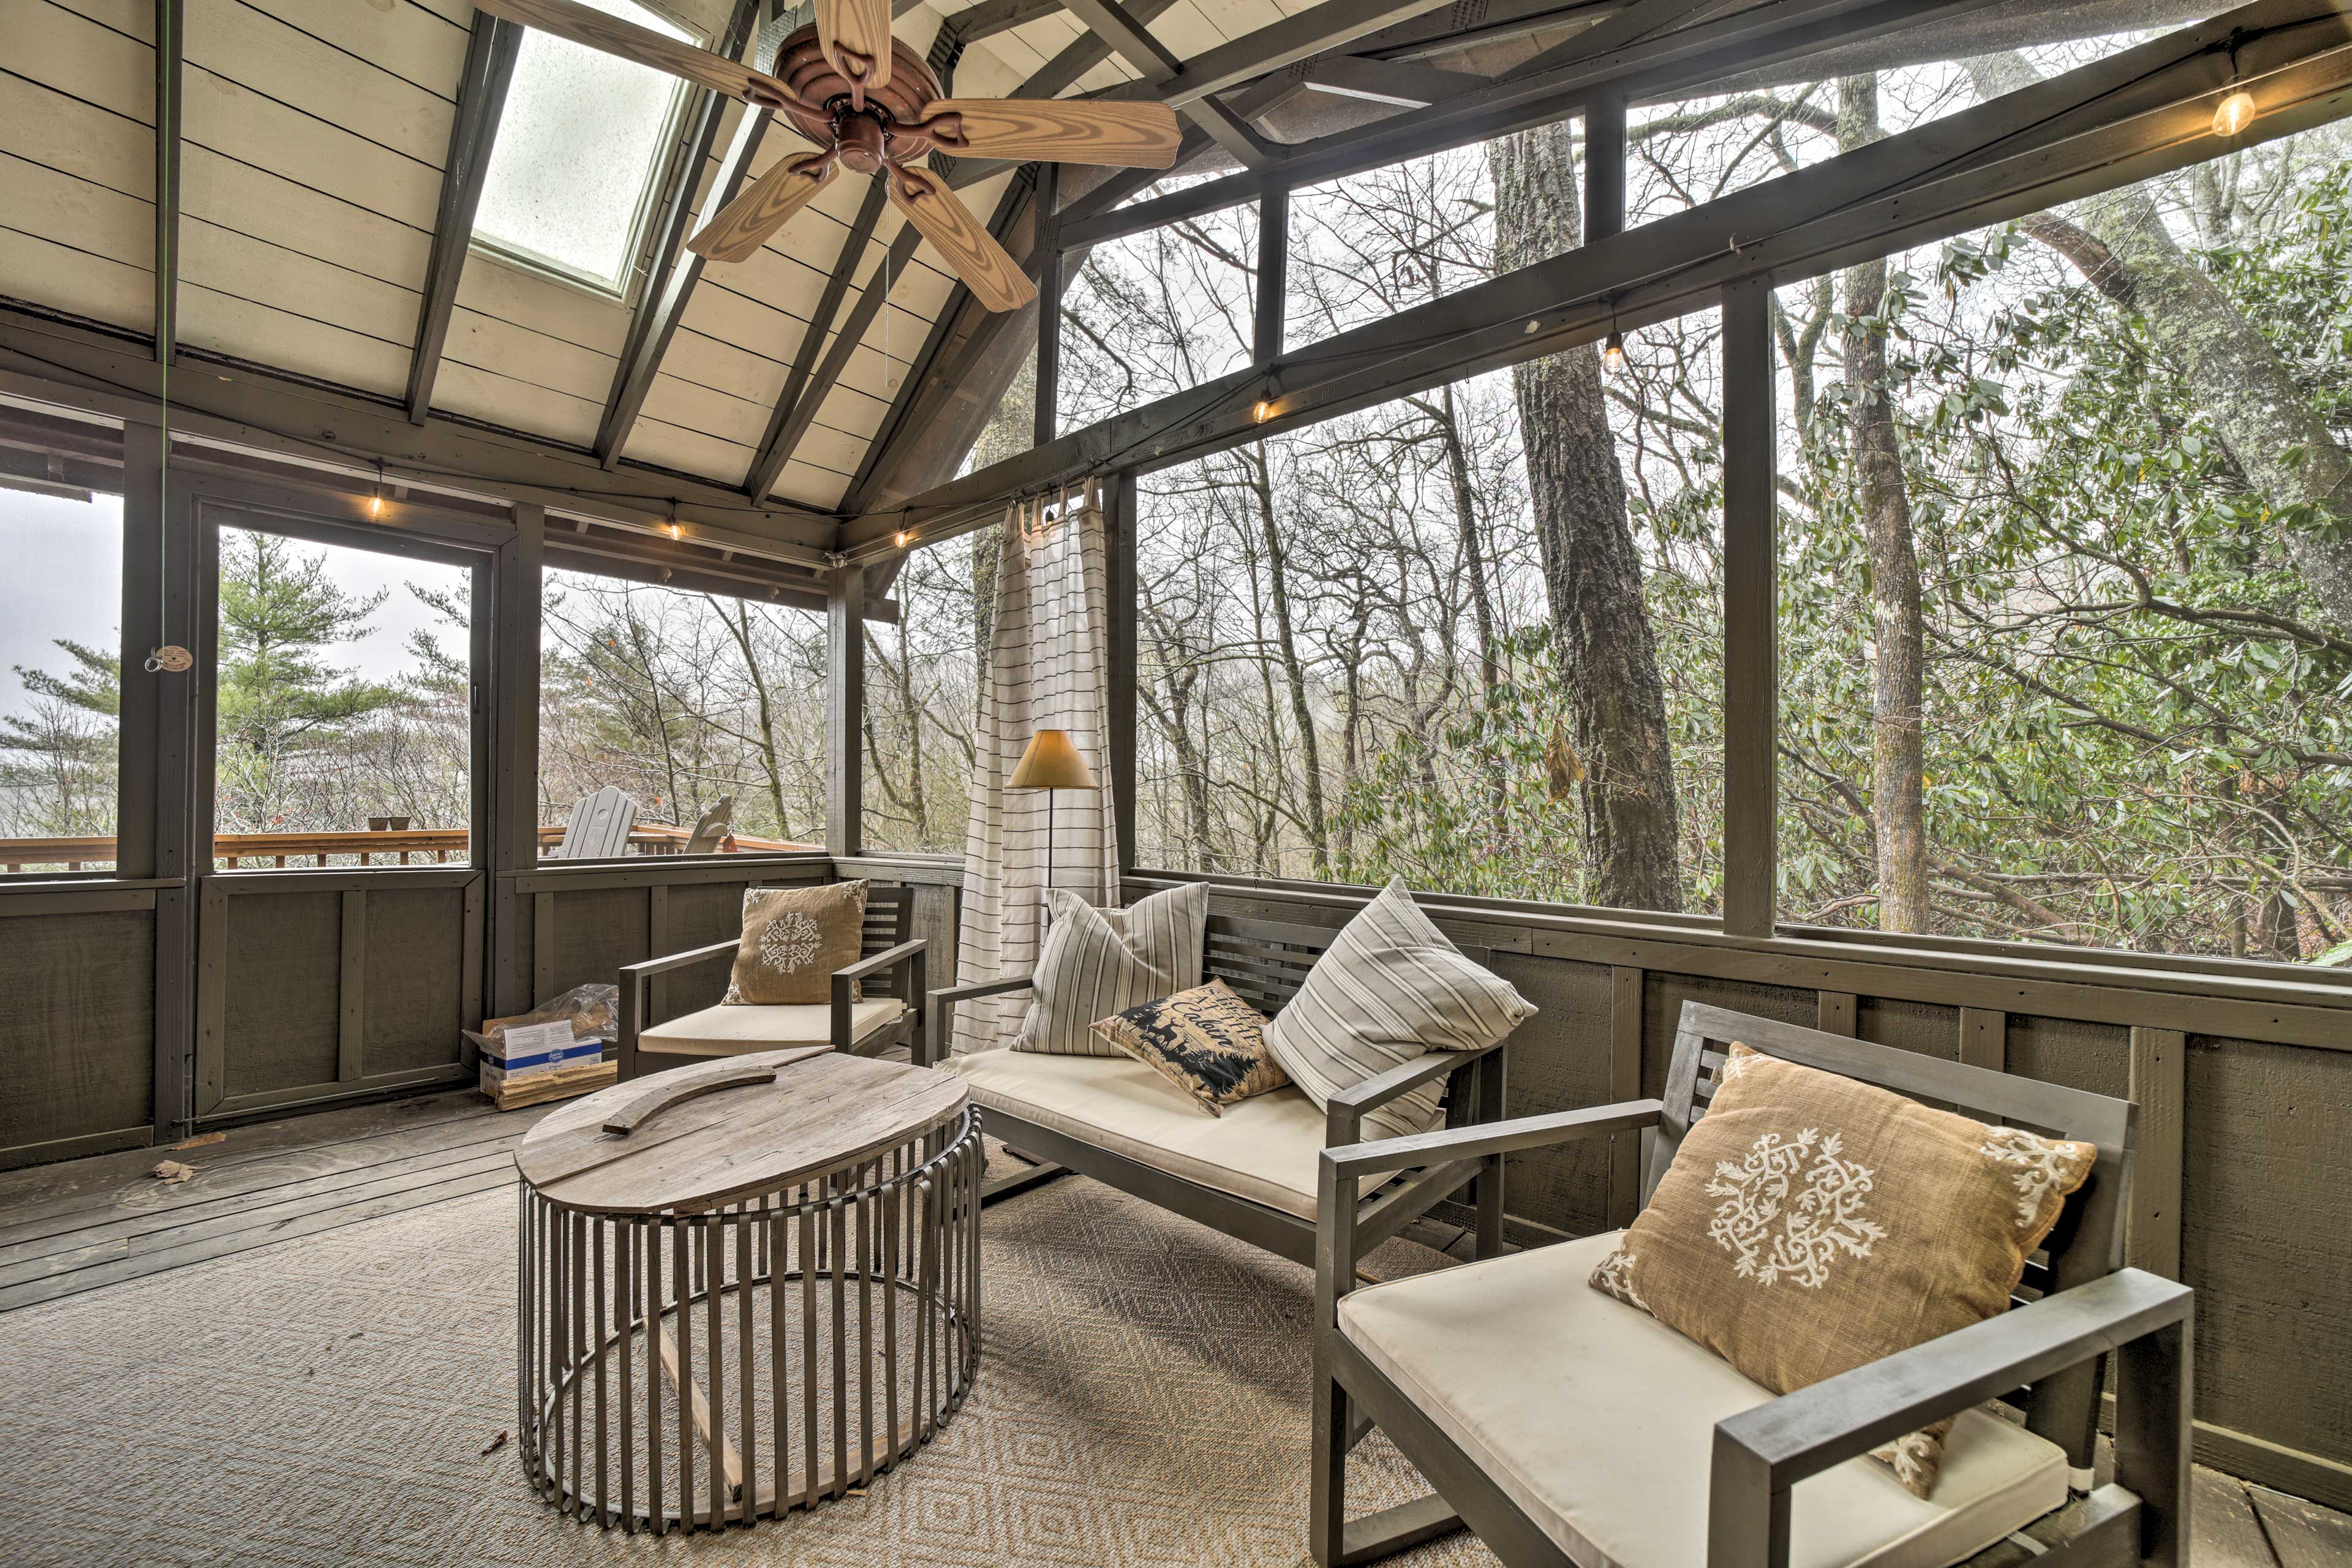 Property Image 1 - Chic Cashiers Cabin: Mountain View, Screened Porch